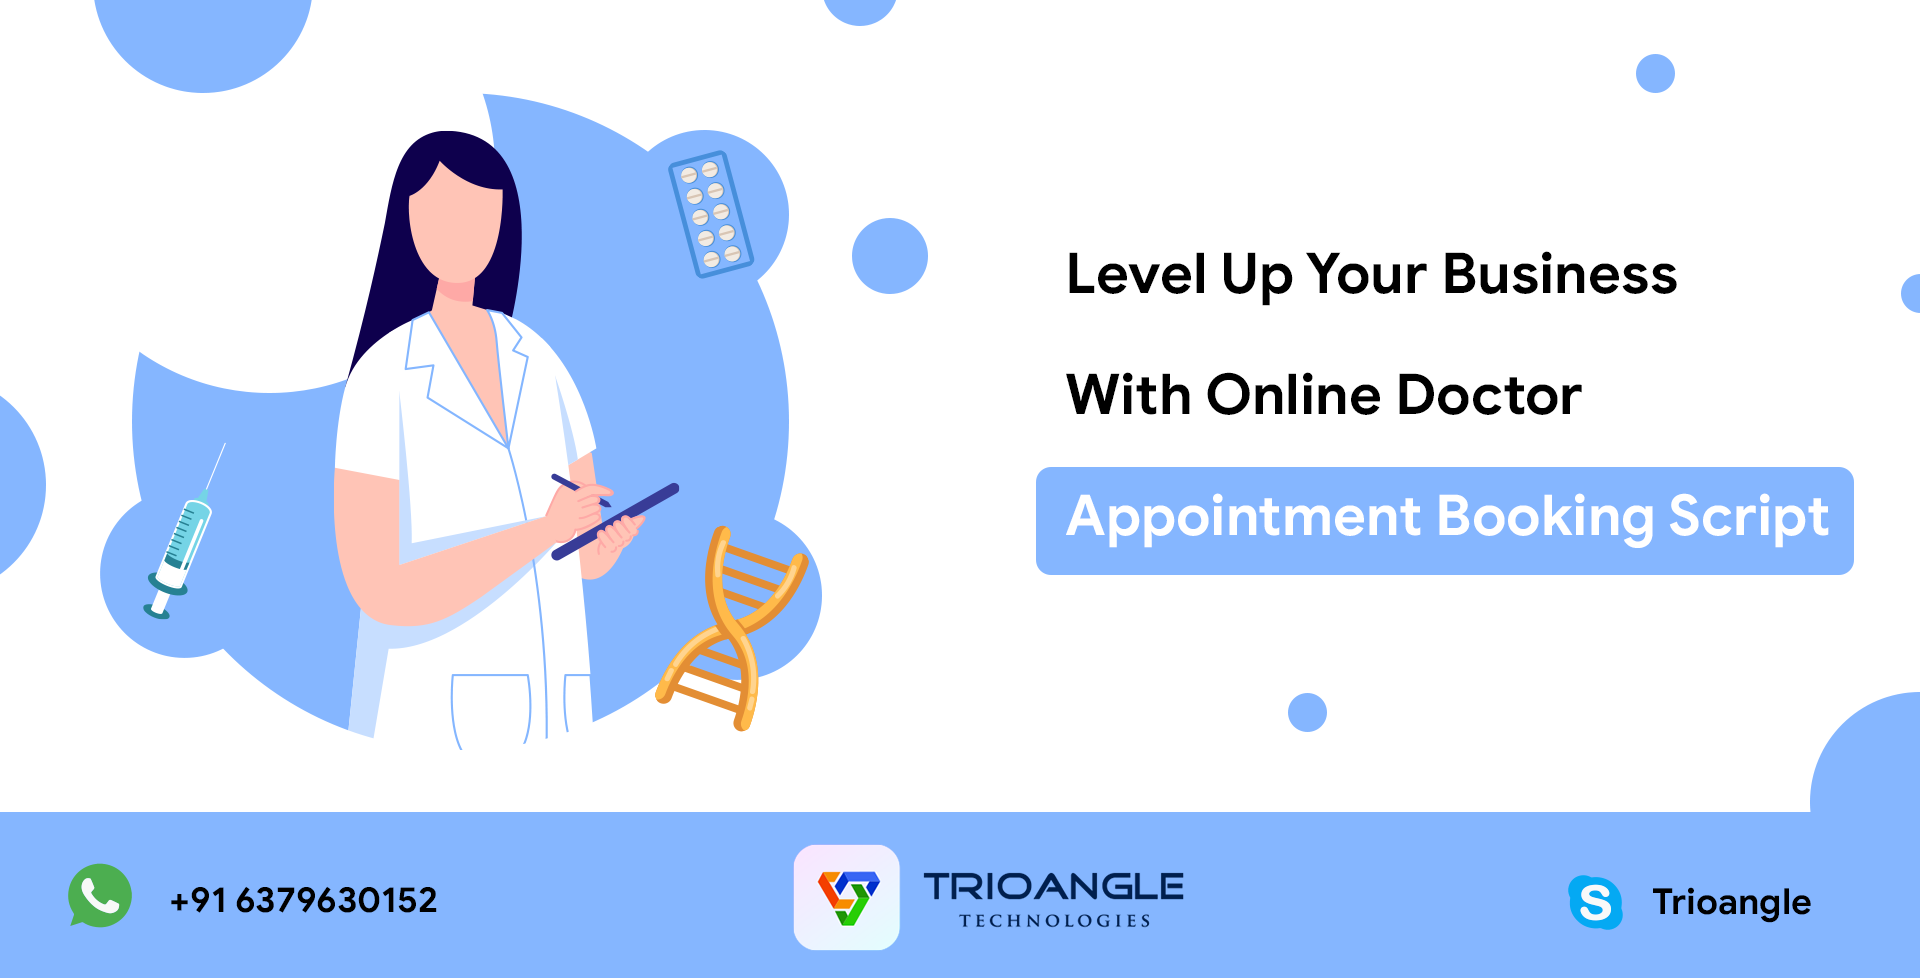 Article about Level Up Your Business With Online Doctor Appointment Booking Script